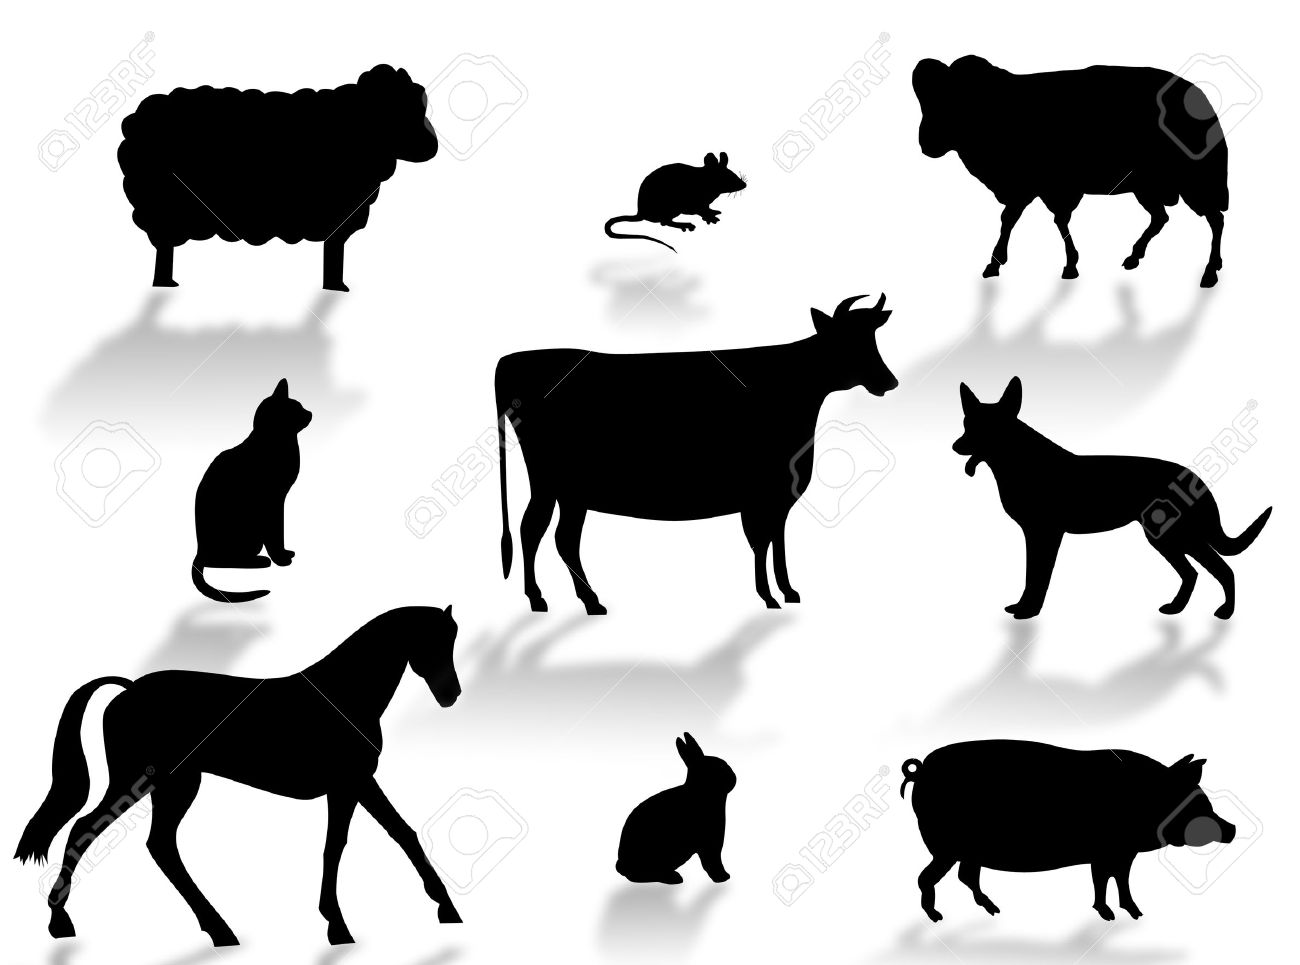 http://previews.123rf.com/images/guilu67/guilu670709/guilu67070900002/1584793-farm-animals-silhouettes-with-shadows-on-a-white-background-stock-photo.jpg